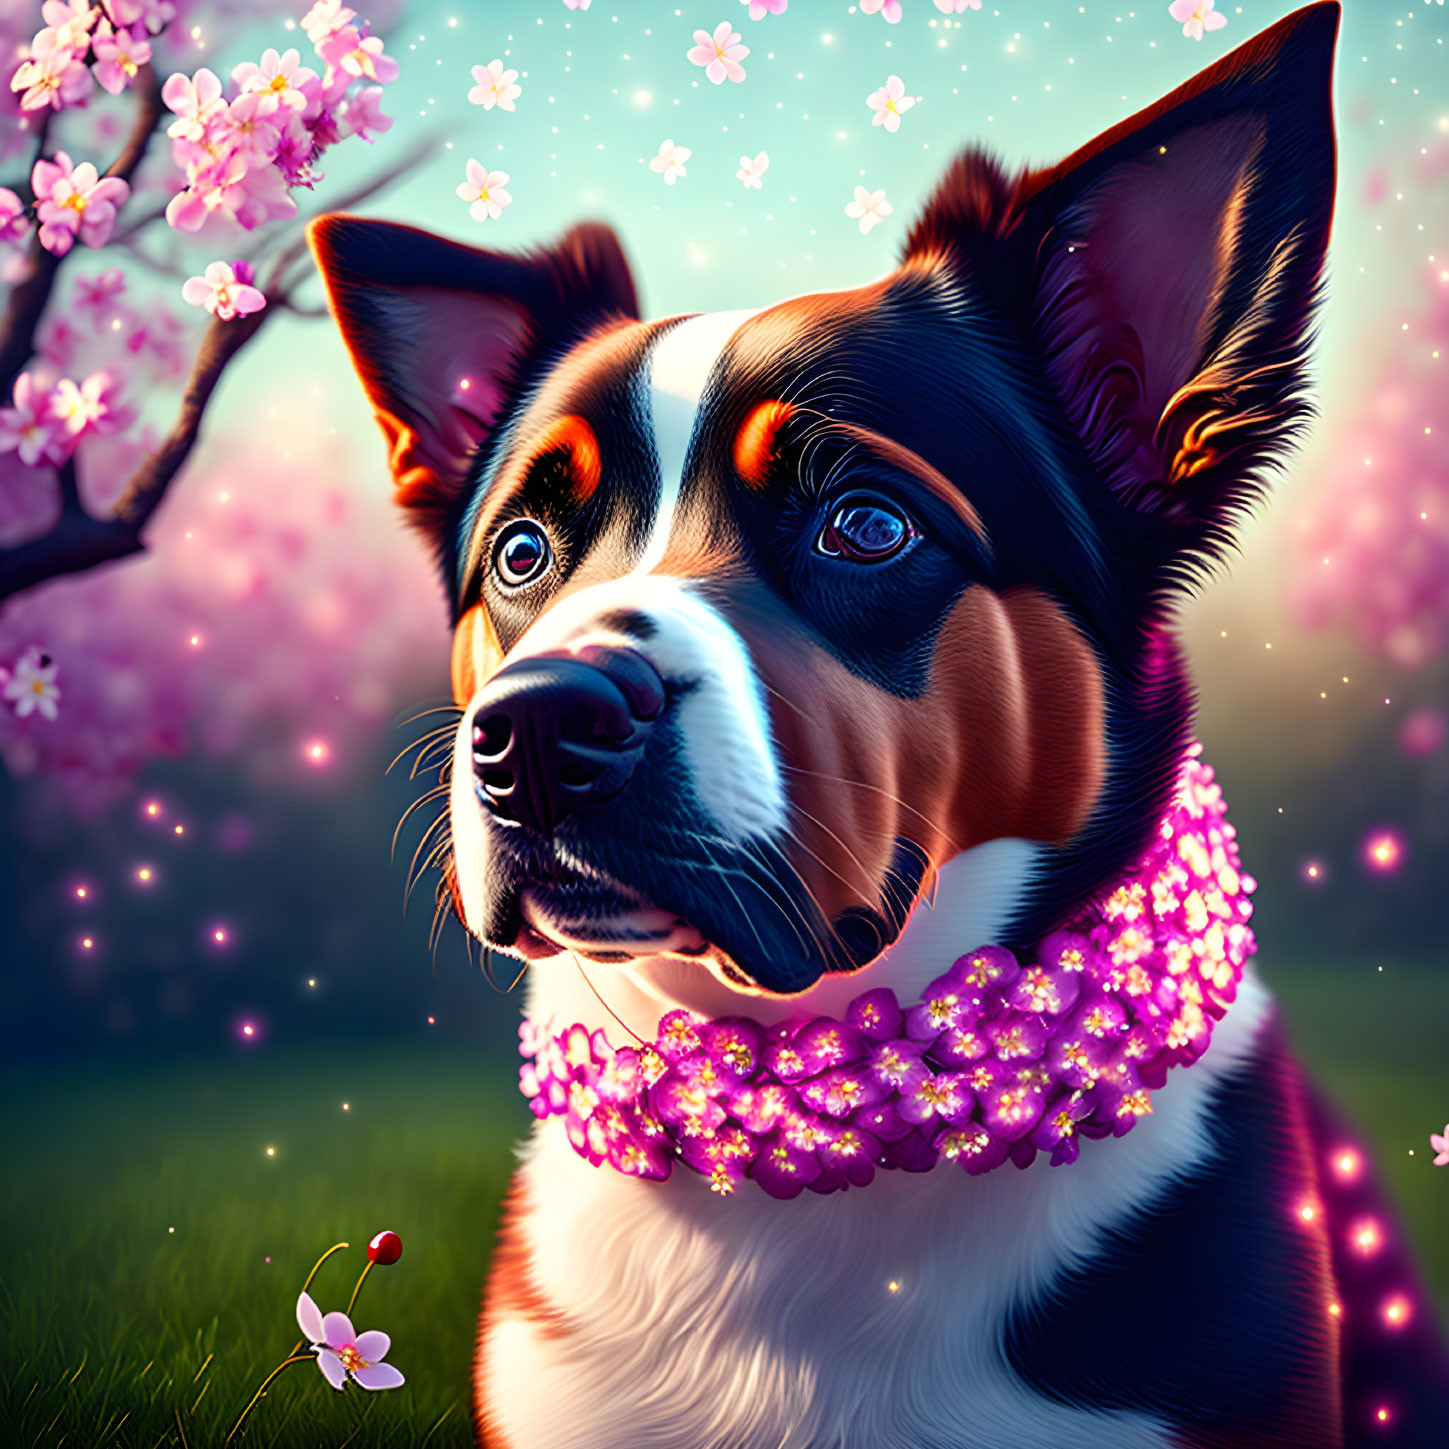 Colorful Digital Art: Tricolor Dog with Floral Necklace in Dreamy Landscape